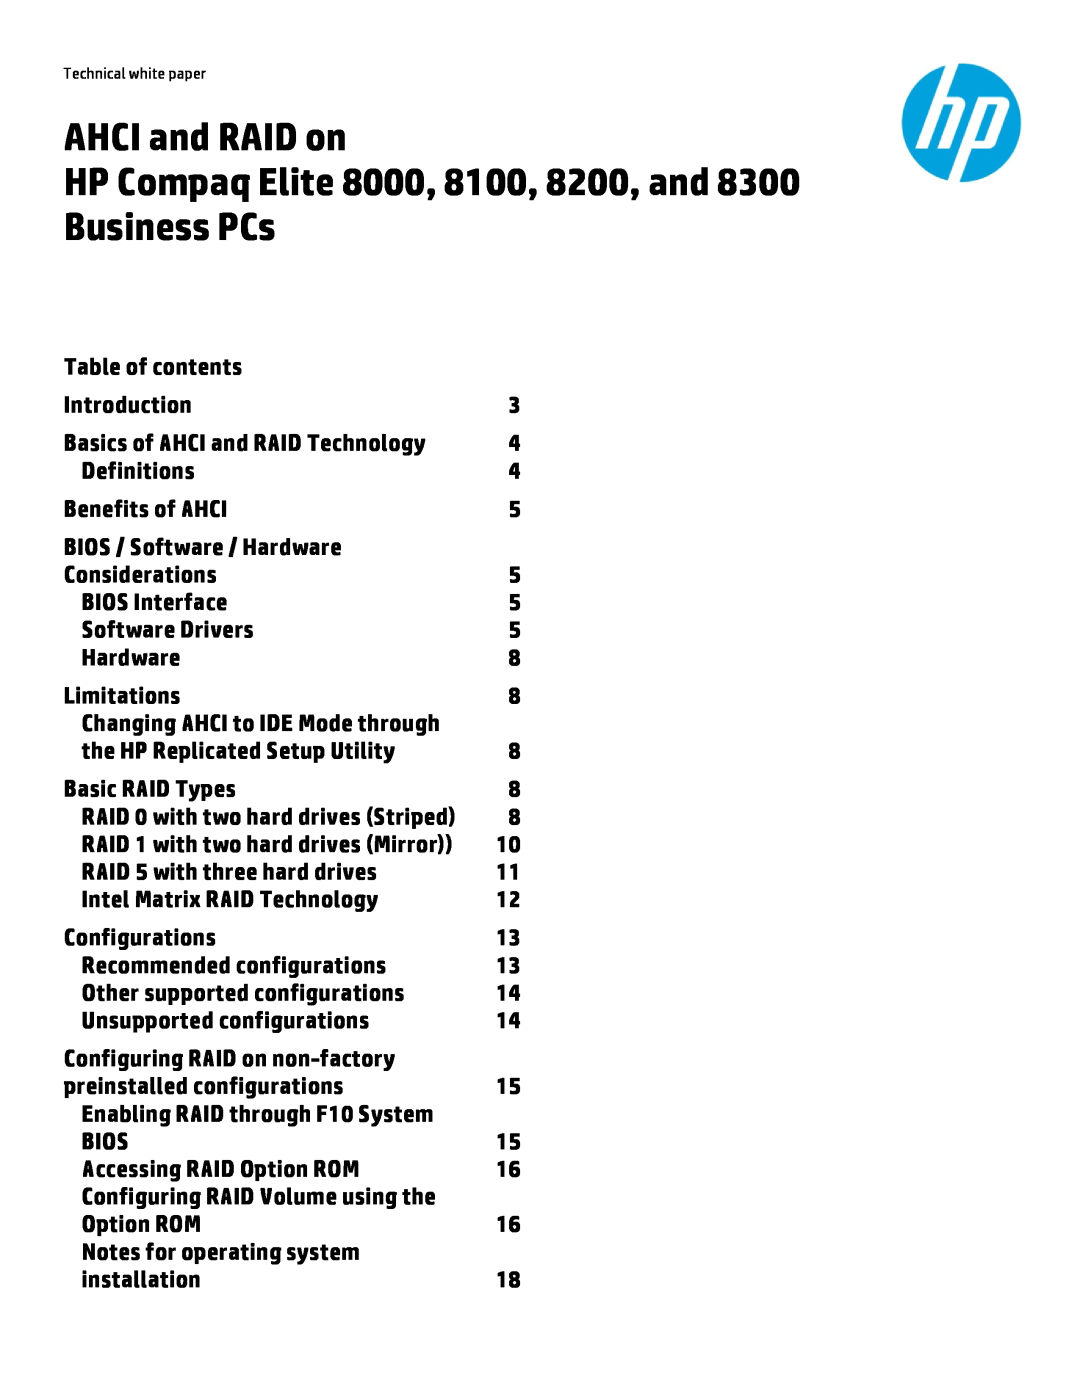 HP 8000 tower manual AHCI and RAID on, HP Compaq Elite 8000, 8100, 8200, and 8300 Business PCs 